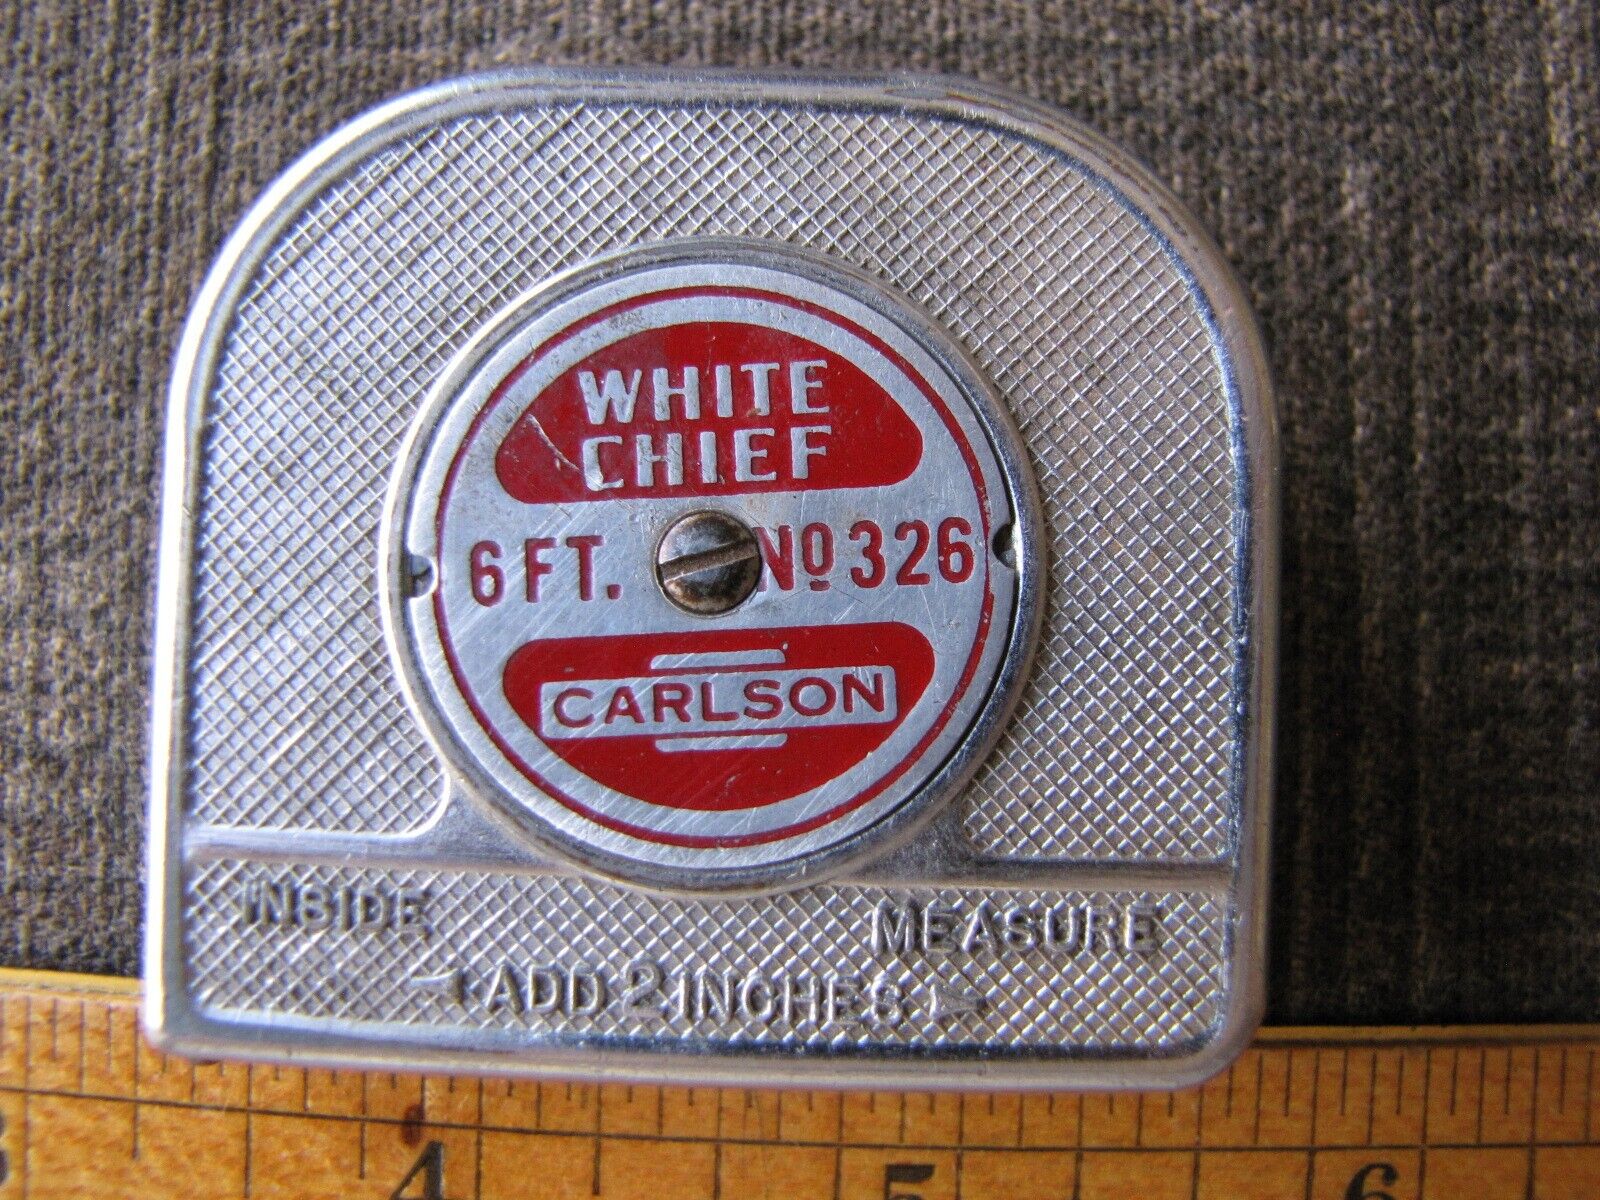 White Chief Carlson & Sullivan No326 6 Ft Pocket Sized Tape Measure Made in USA